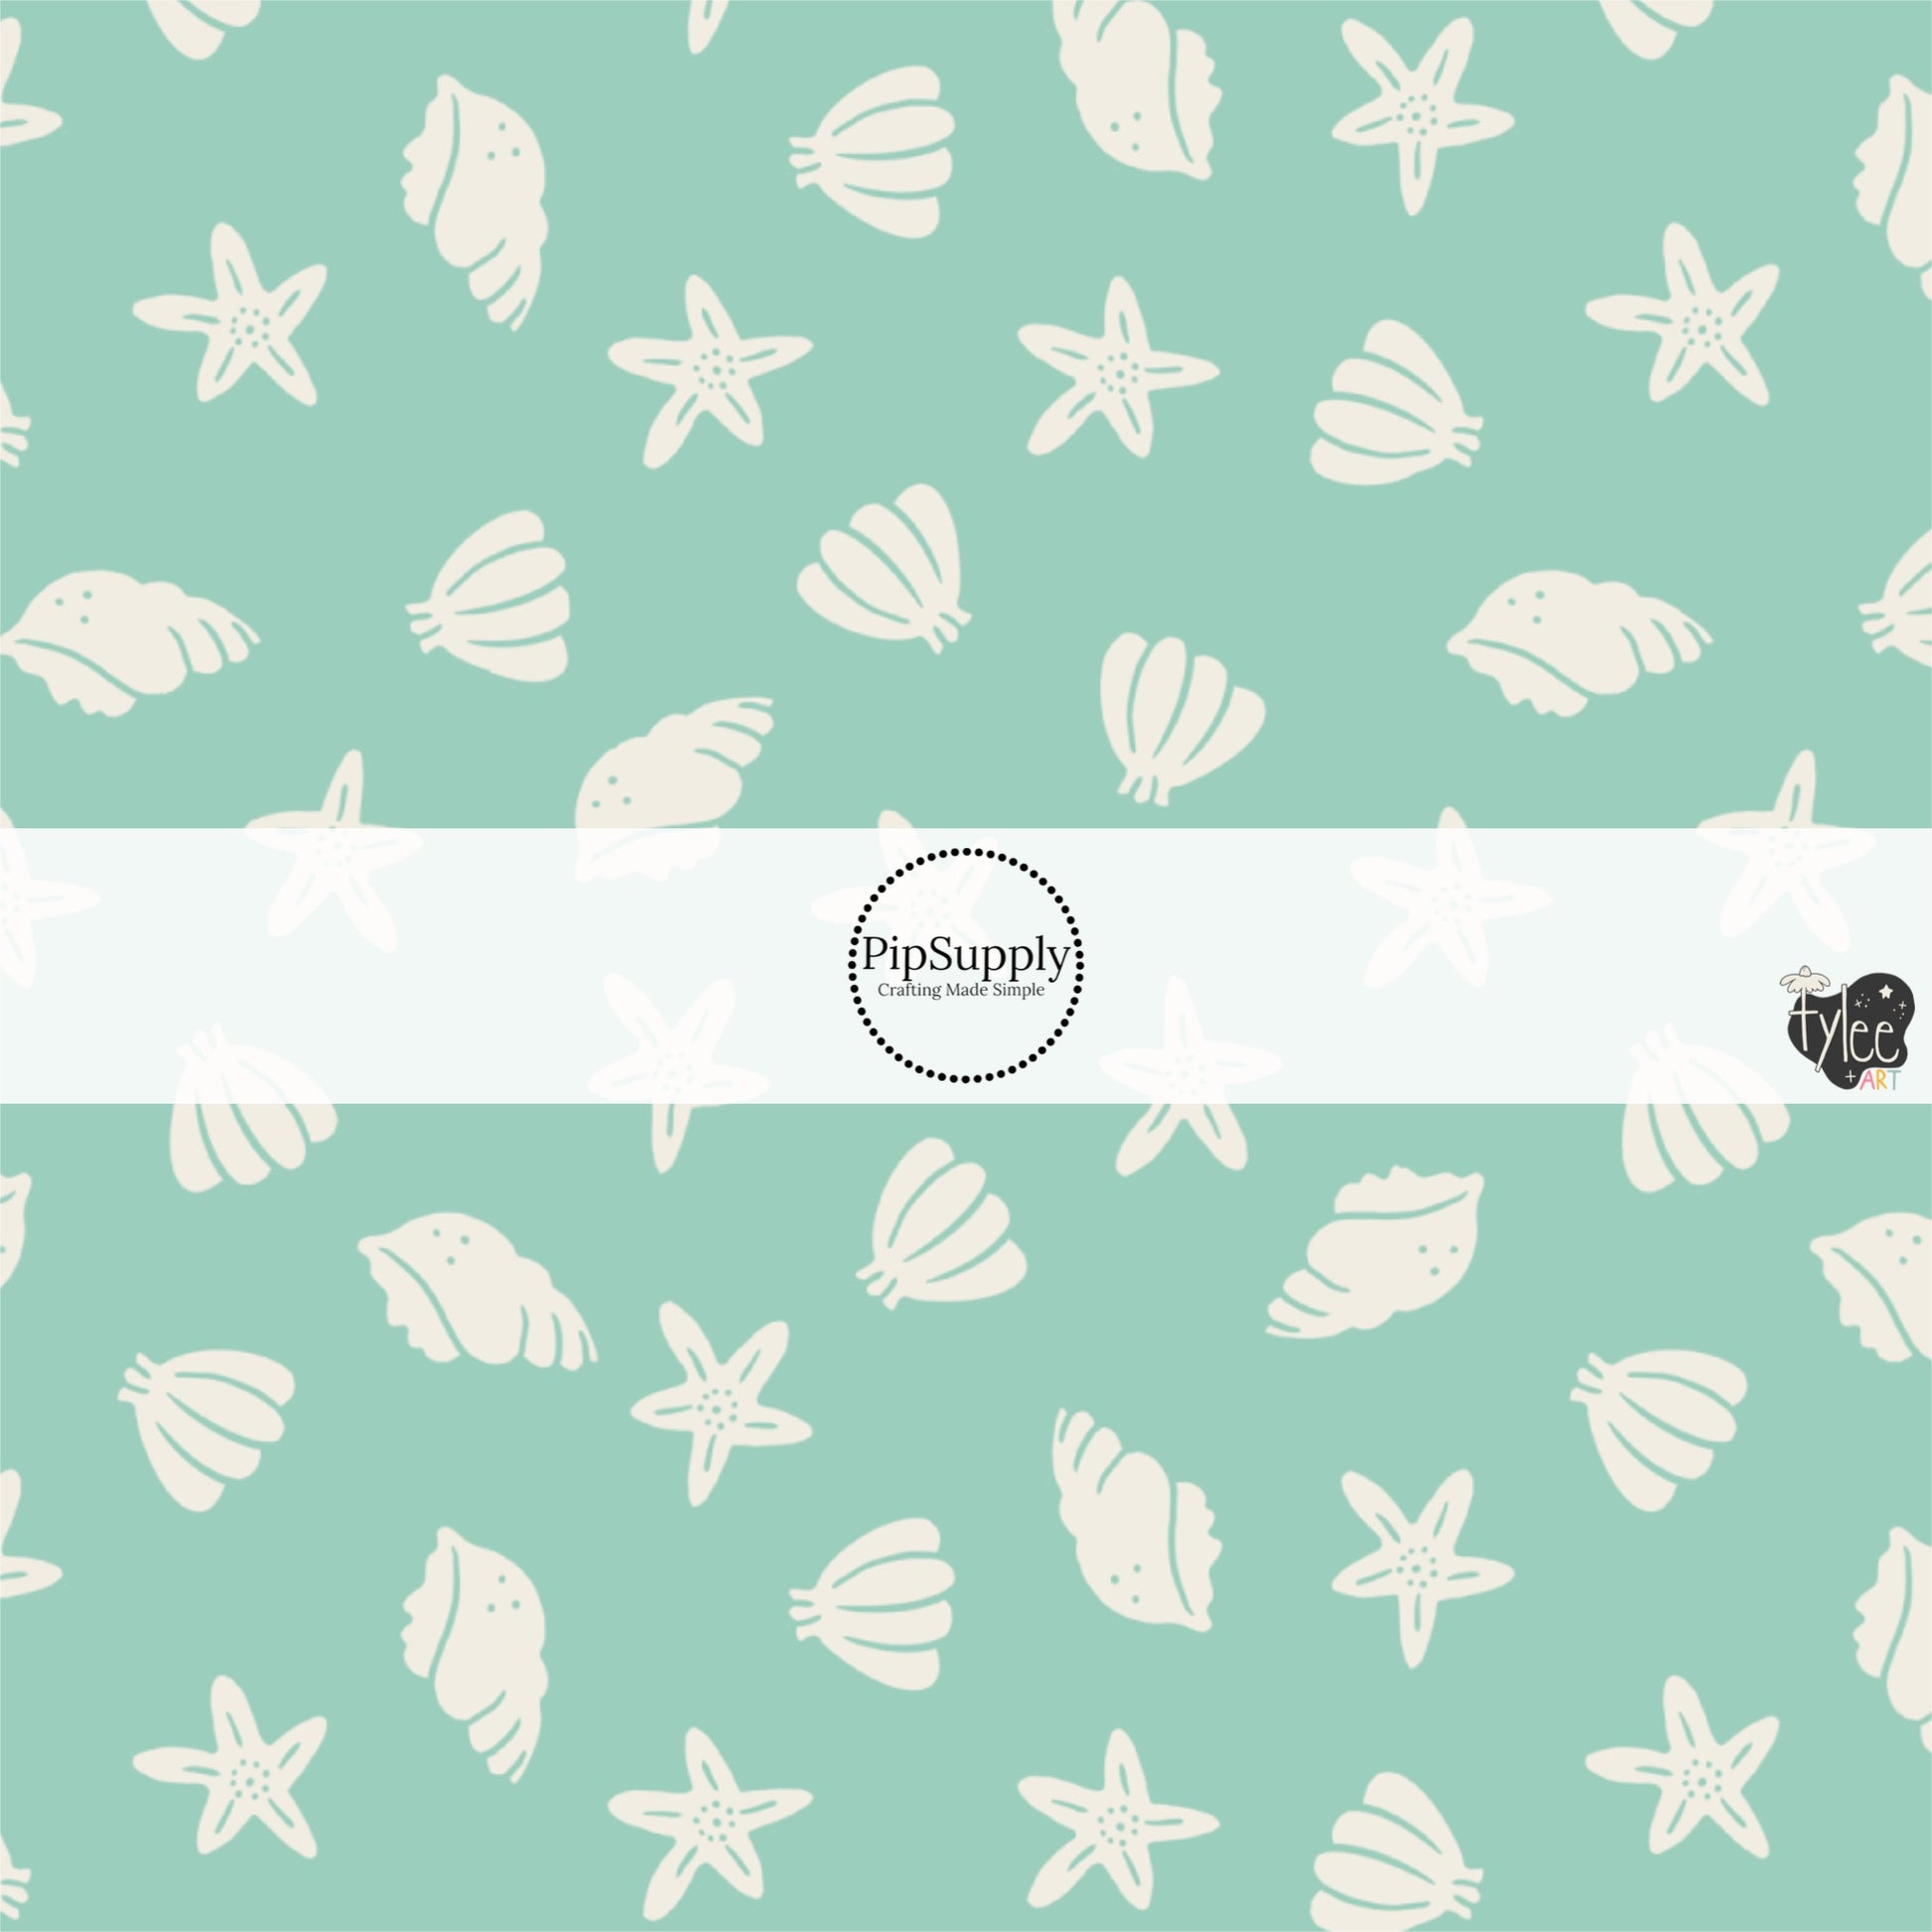 This beach fabric by the yard features seashells on light green. This fun themed fabric can be used for all your sewing and crafting needs!